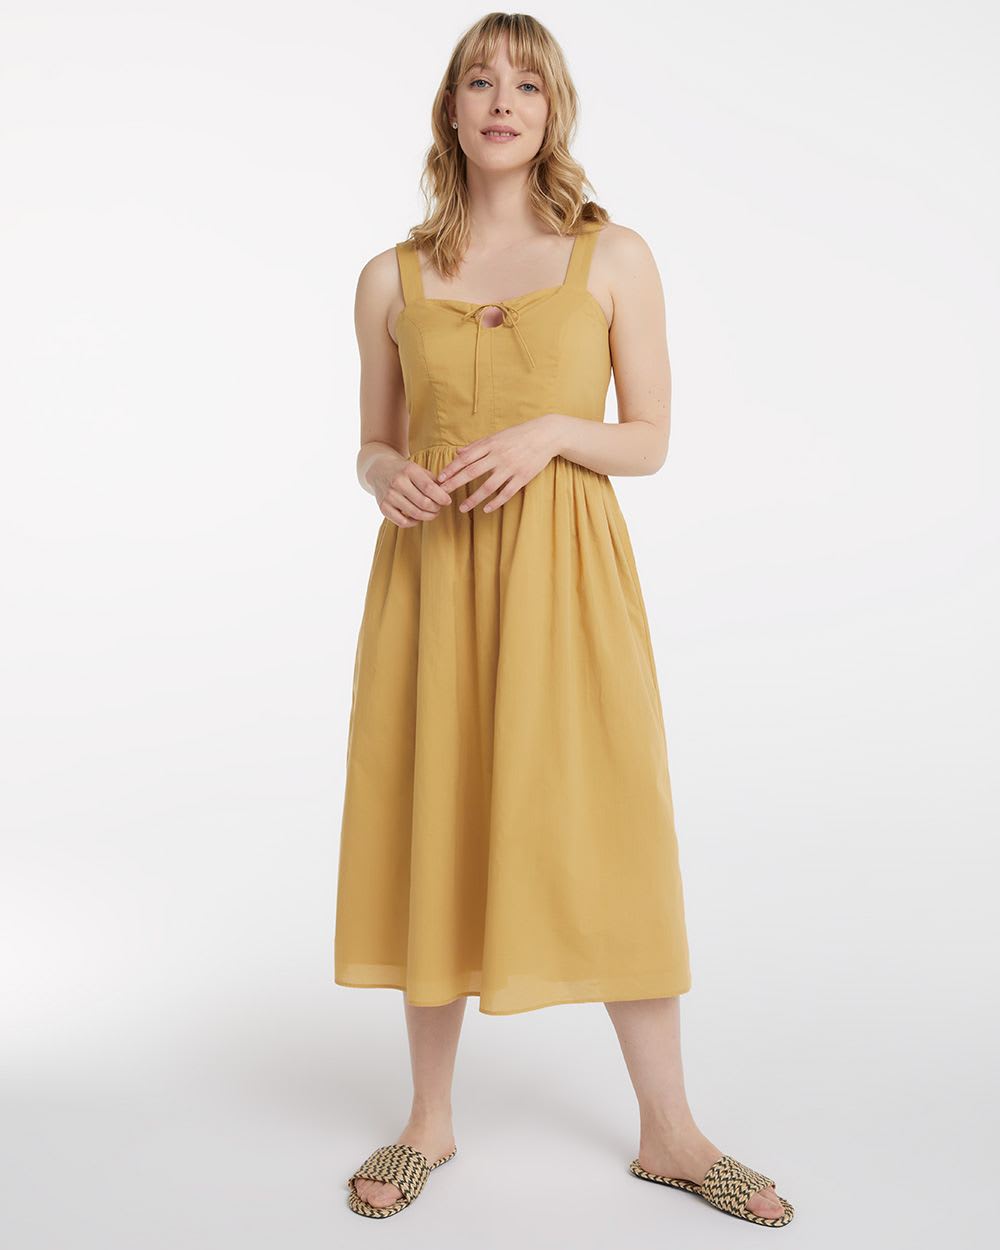 Sweetheart Neckline Fit and Flare Midi Dress